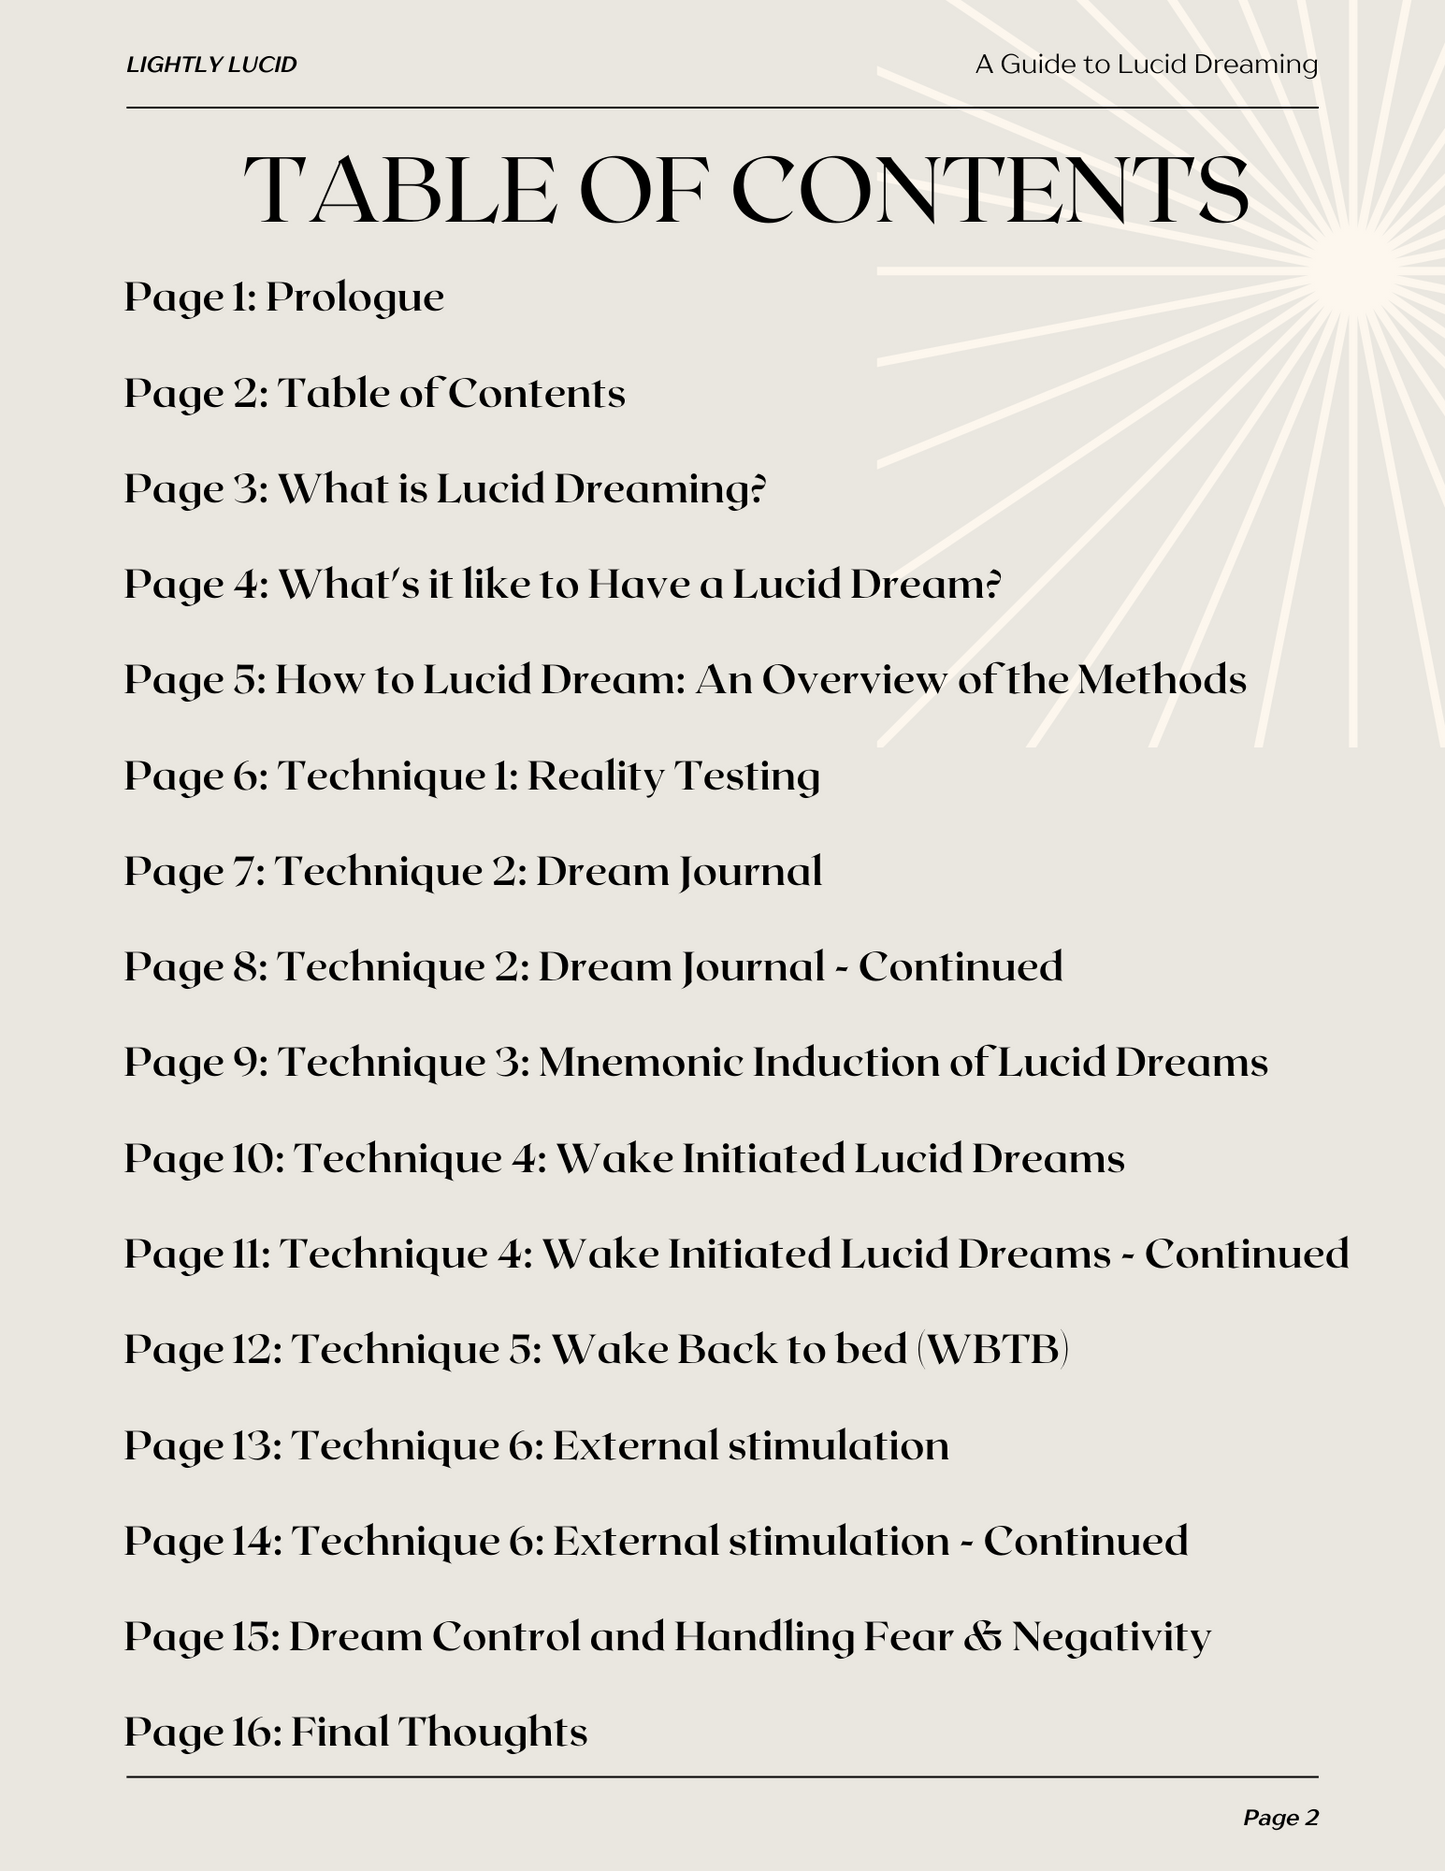 Table of Contents from book